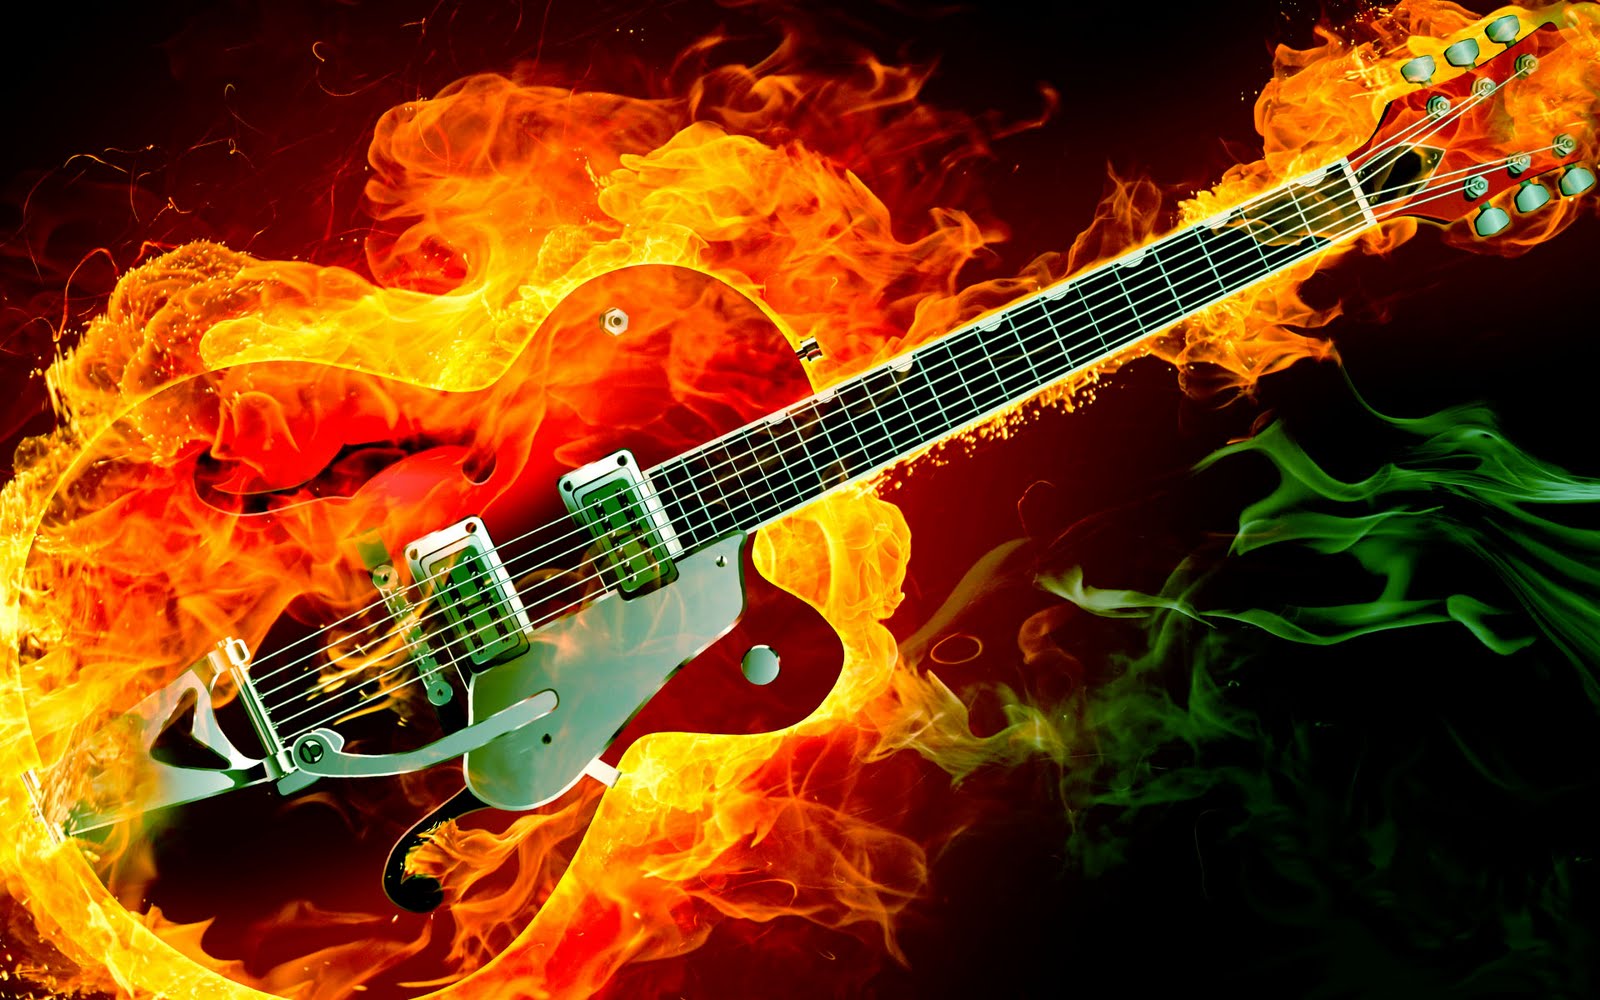 rePin image: Guitar On Blue Fire Guitar On on Pinterest